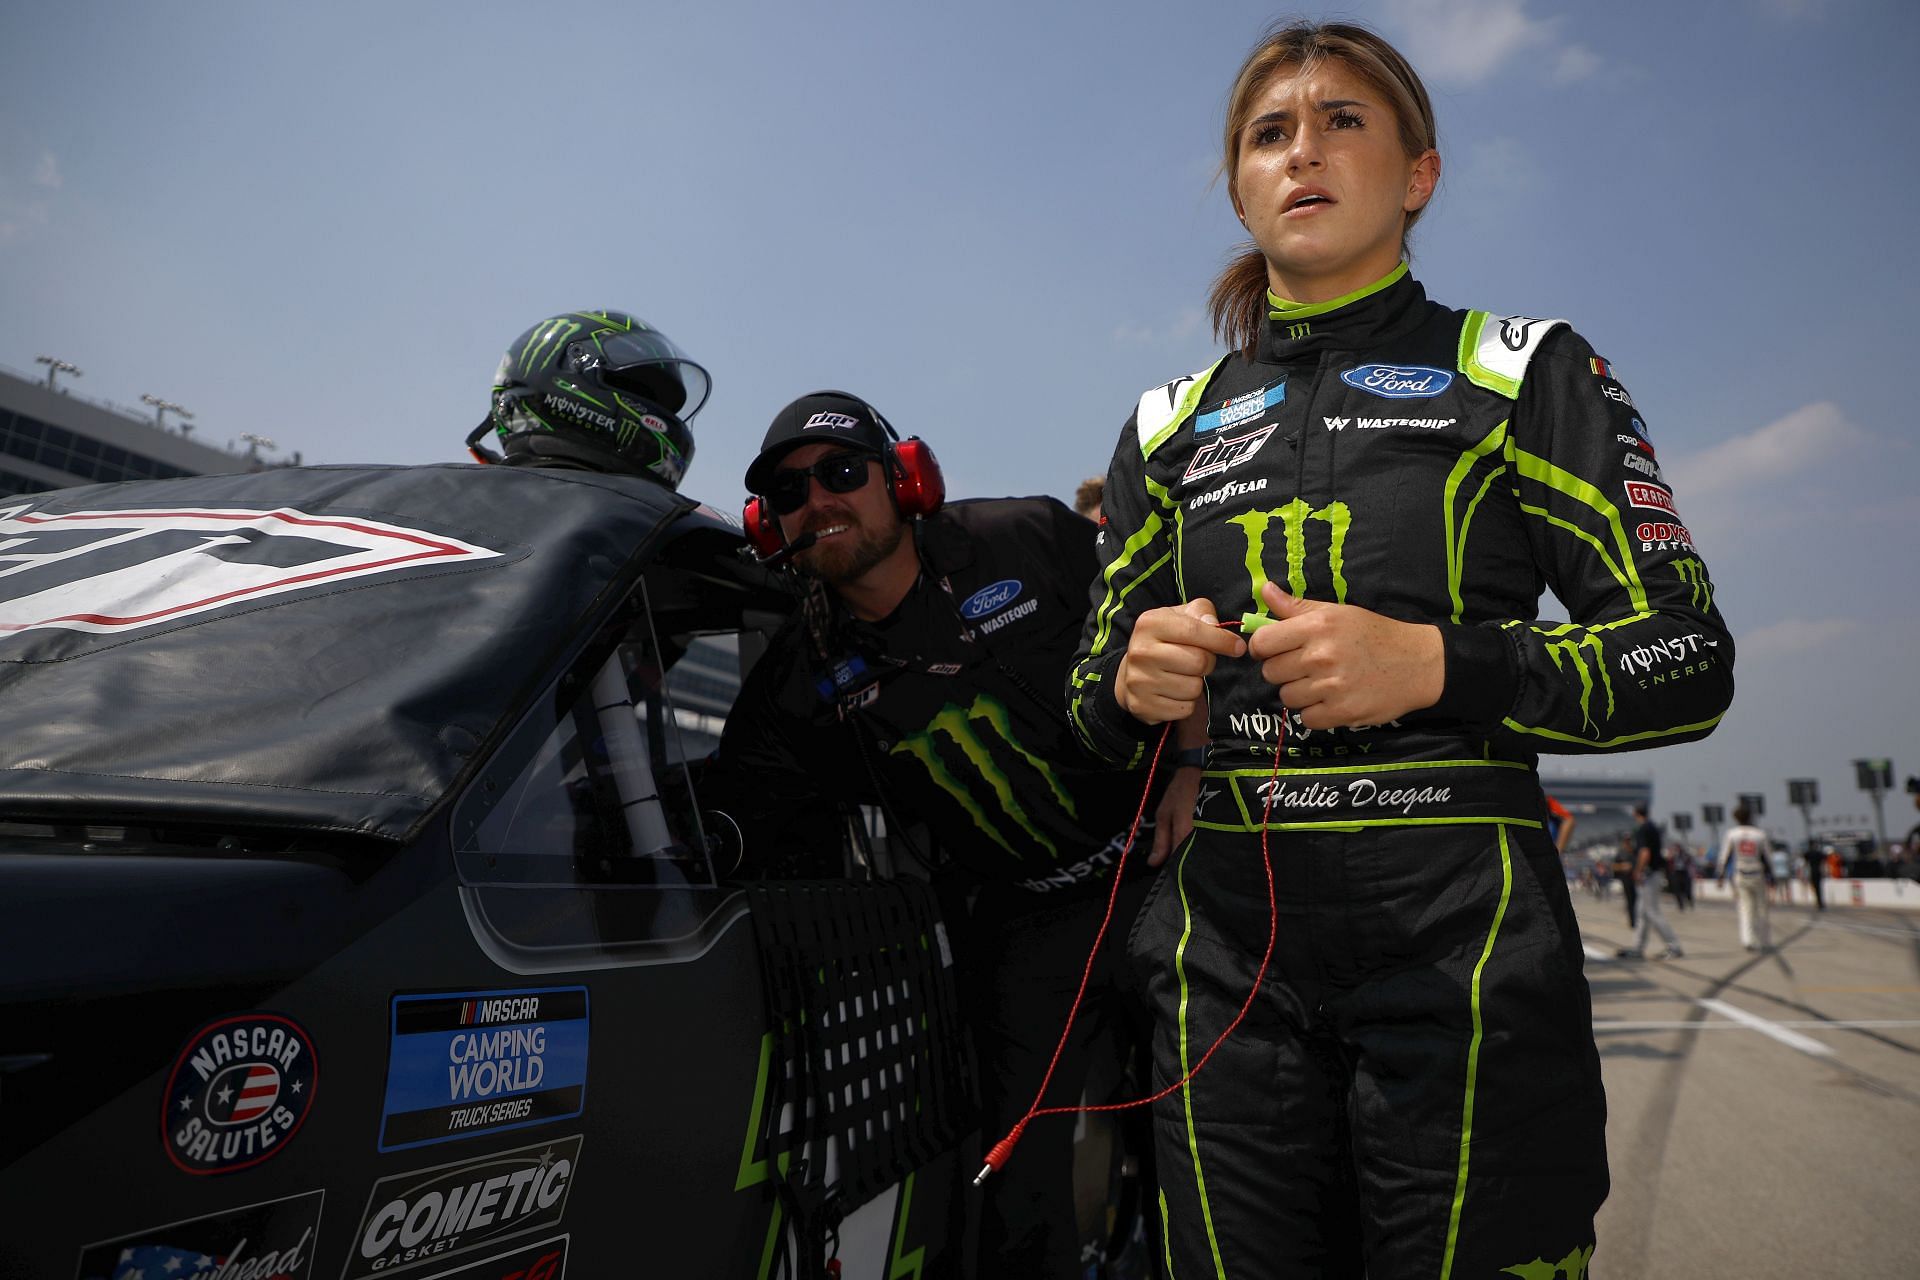 Hailie Deegan walks the grid during qualifying for the NASCAR Camping World Truck Series SpeedyCash.com 220 at Texas Motor Speedway (Photo by Jared C. Tilton/Getty Images)